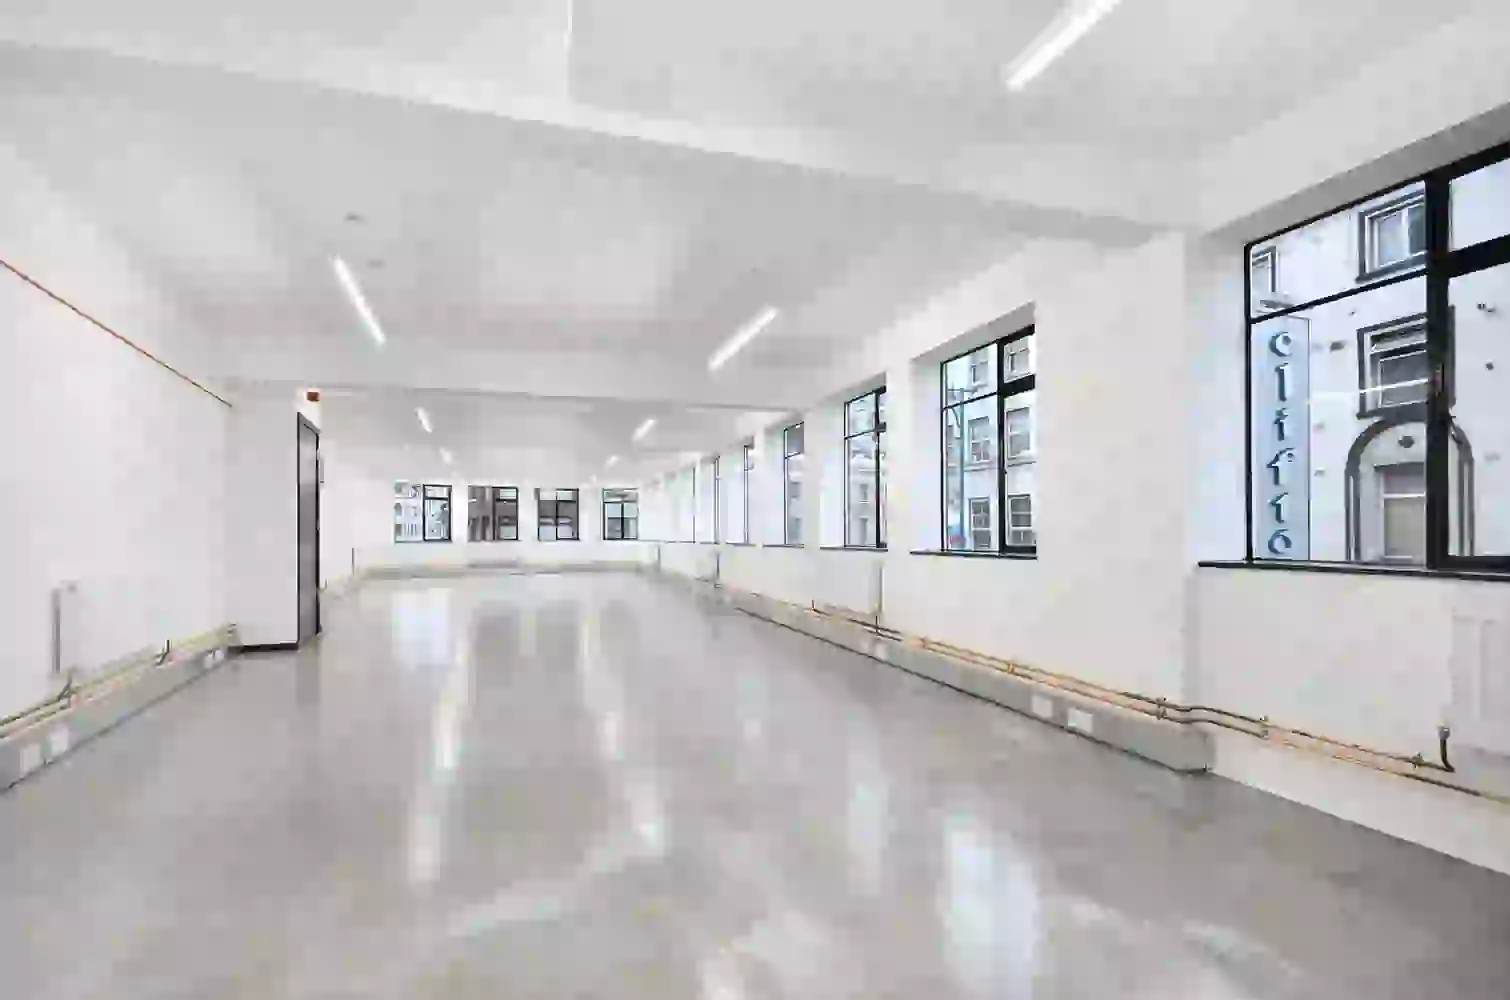 Office space to rent at E1 Studios, 3-15 Whitechapel Road, London, unit NH.OH1S, 1181 sq ft (109 sq m).